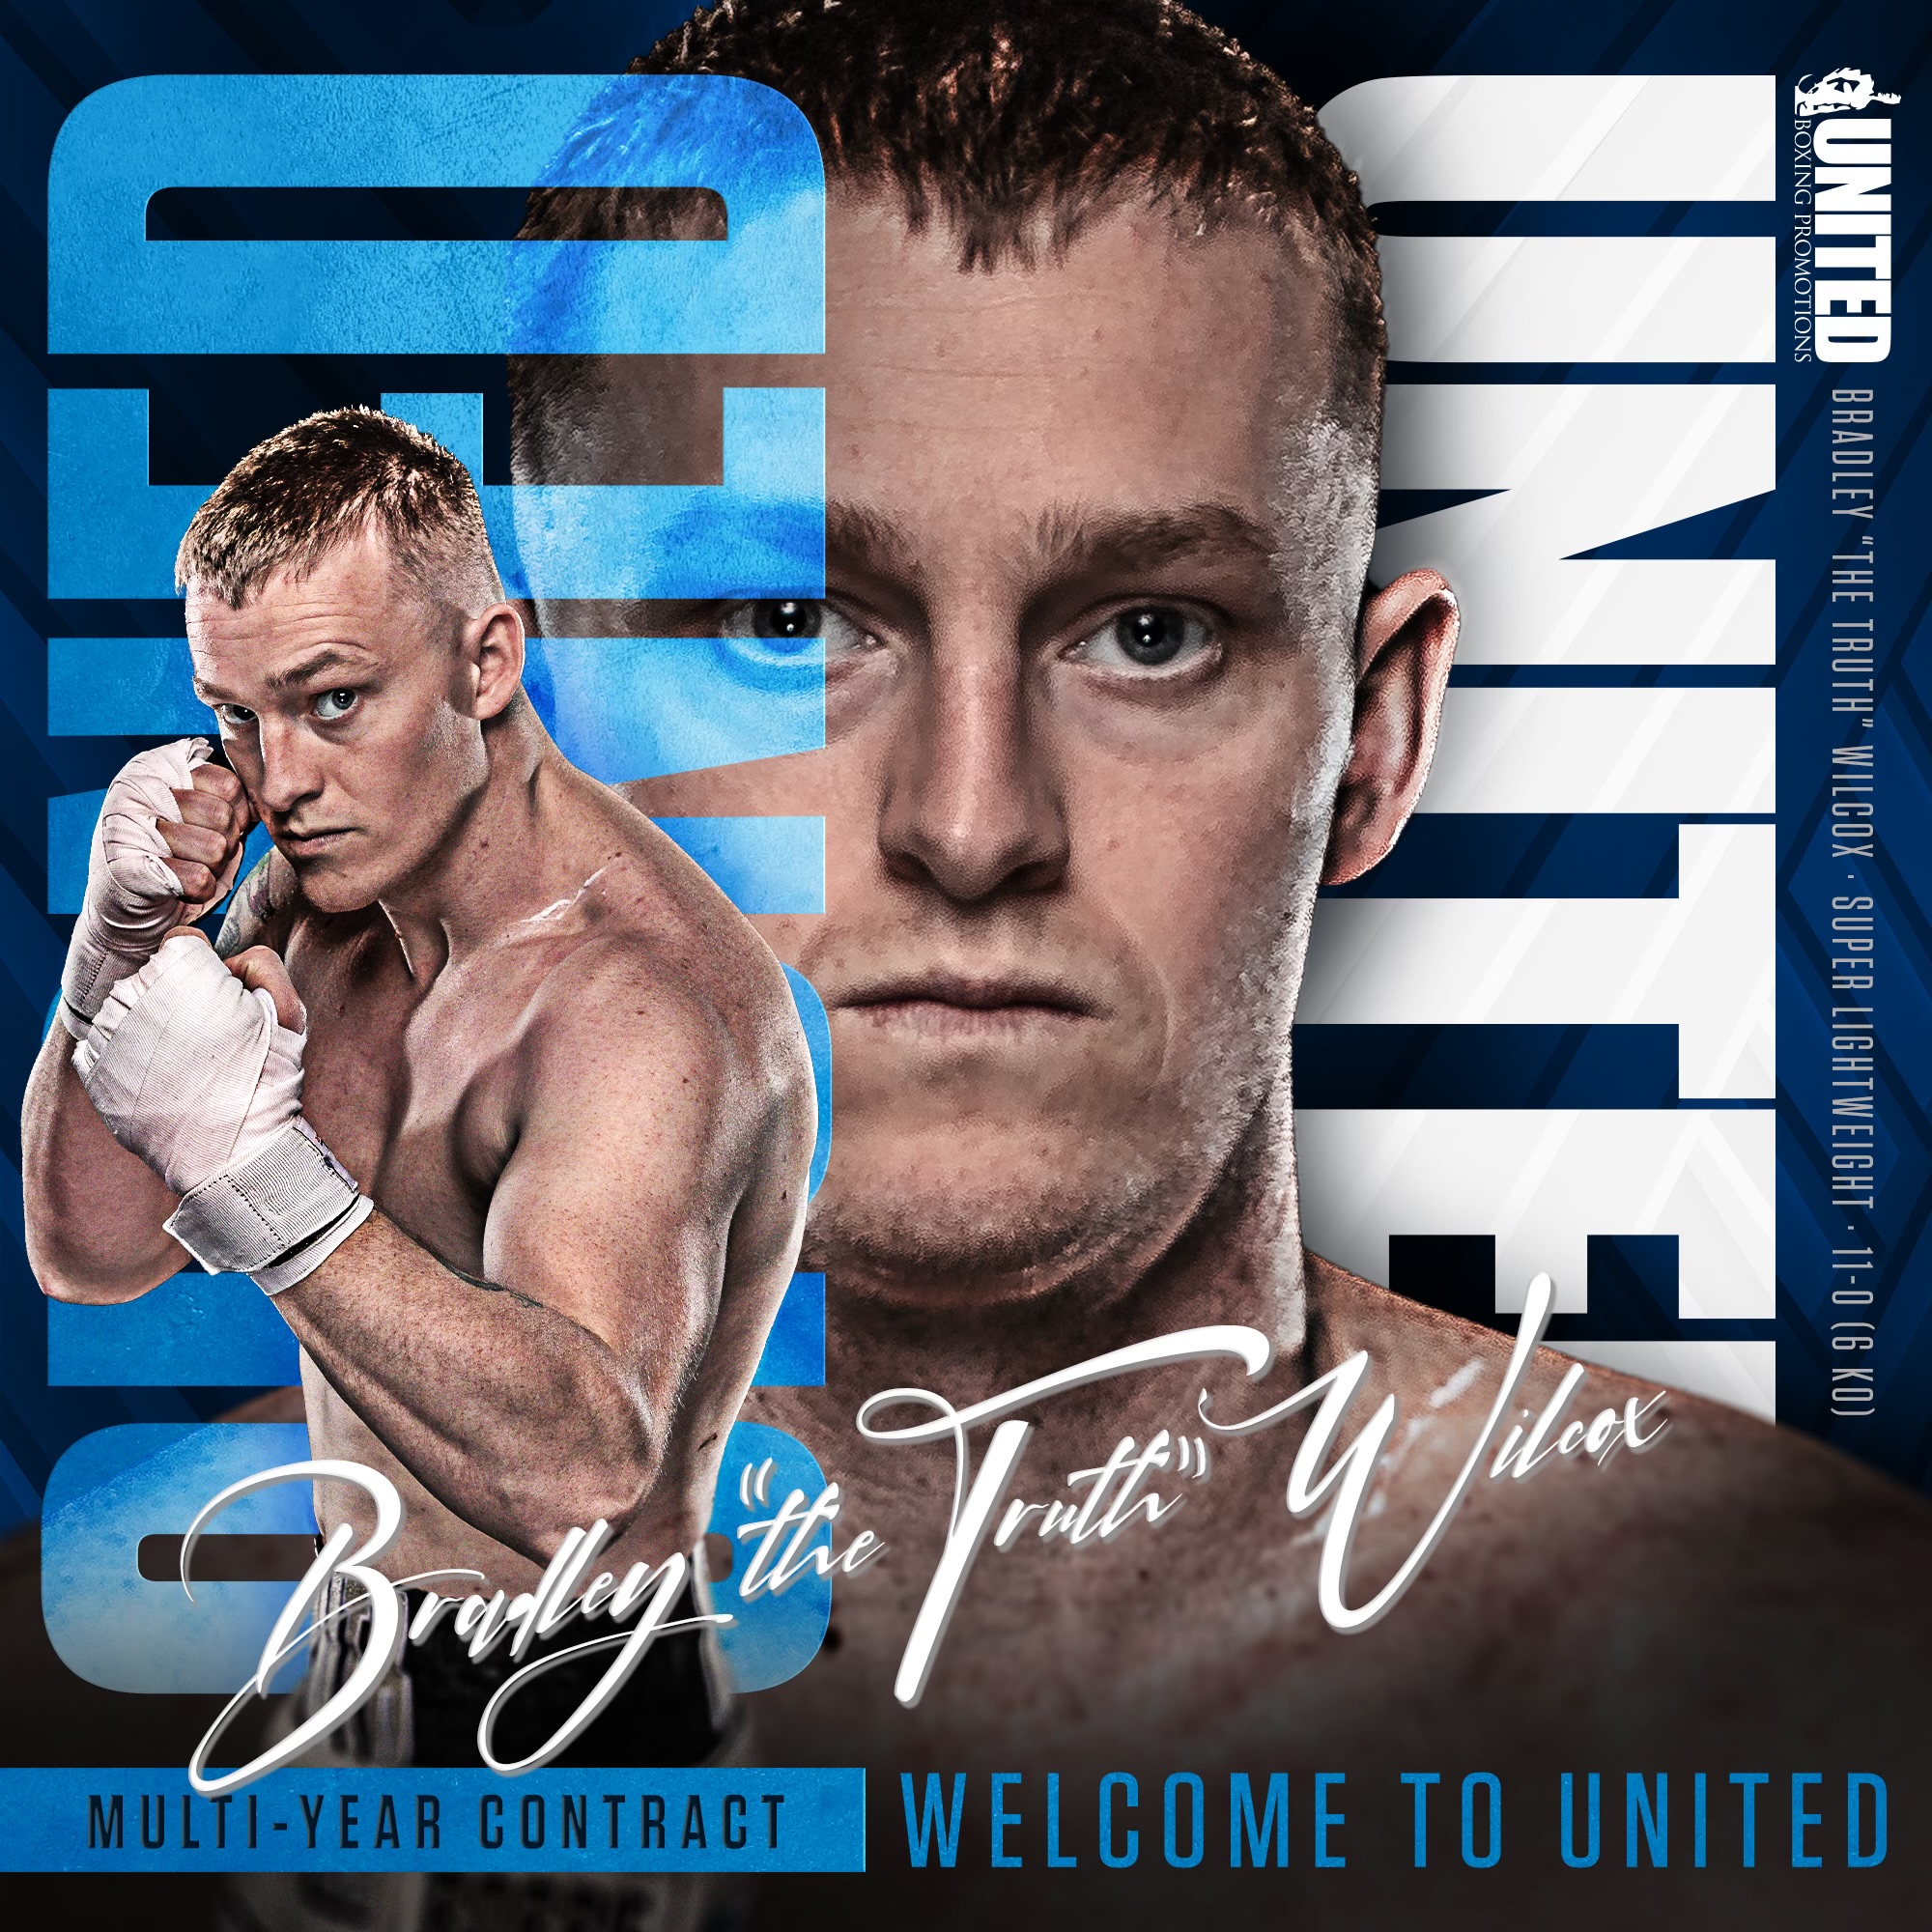 UNITED, SUPER LIGHTWEIGHT BRADLEY WILCOX AGREE TO MULTI-YEAR CONTRACT